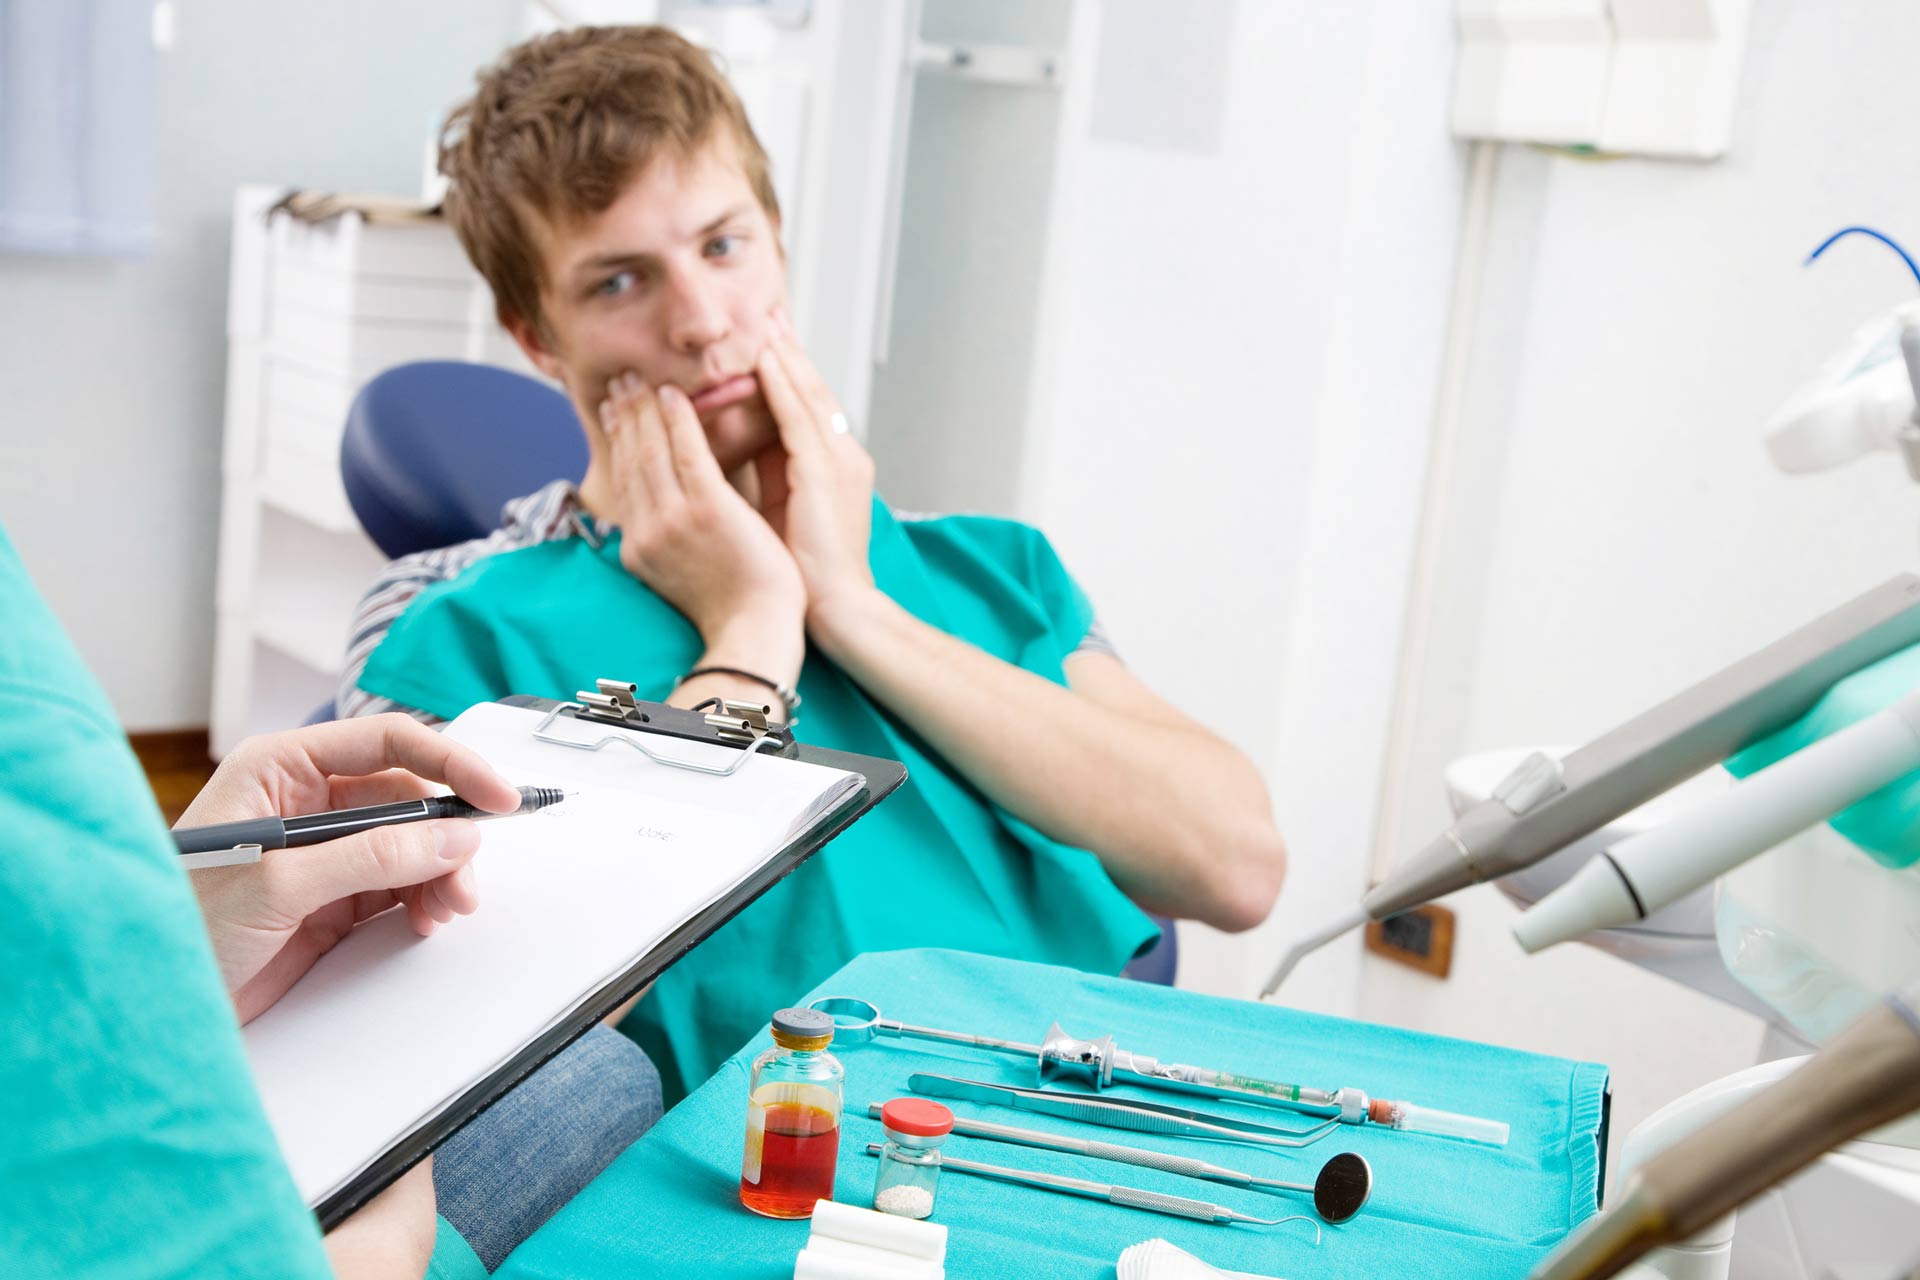 When Should I Seek Emergency Dental Care for My Toothache?